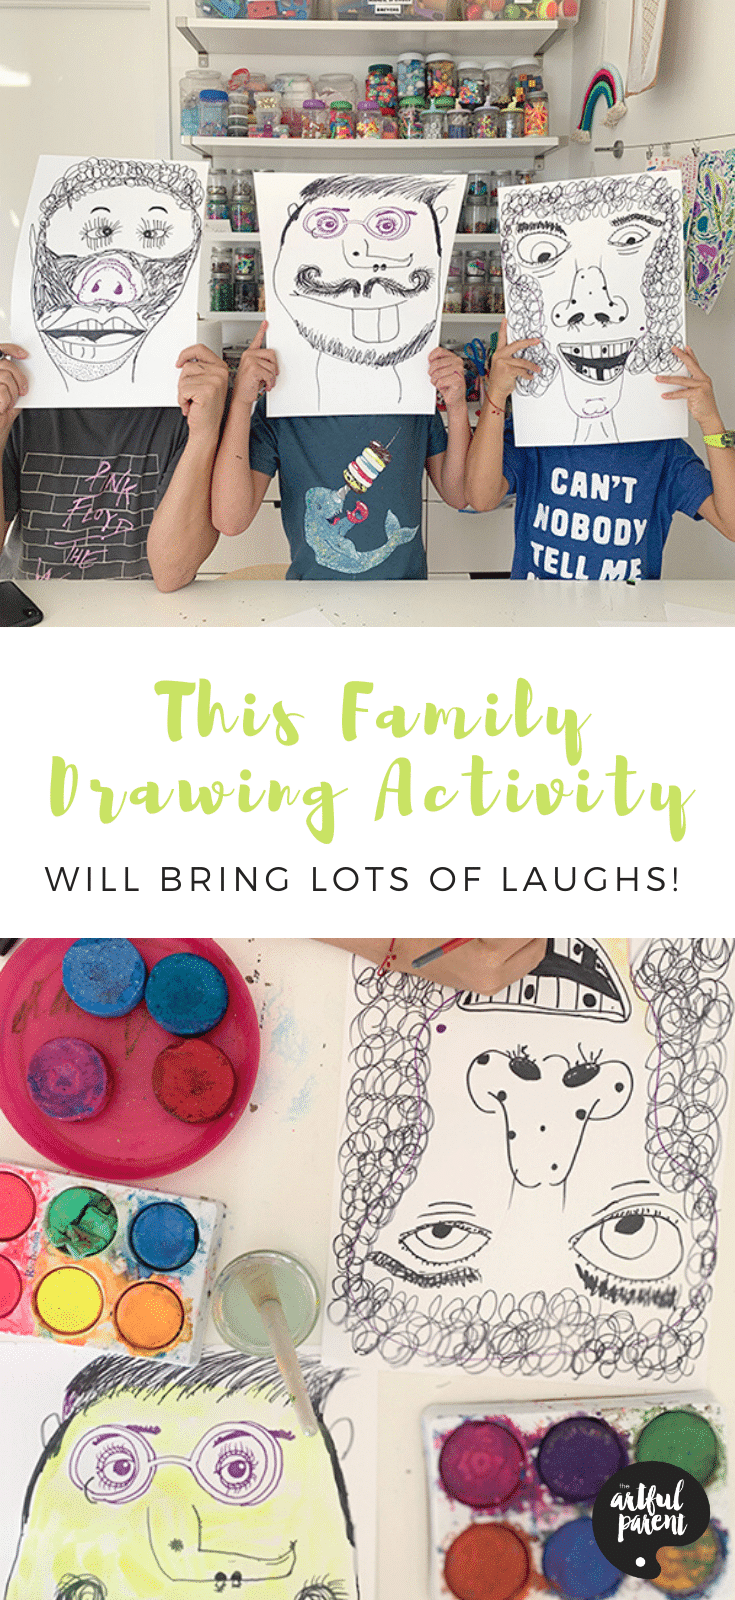 Family Drawing Activity _ Pinterest